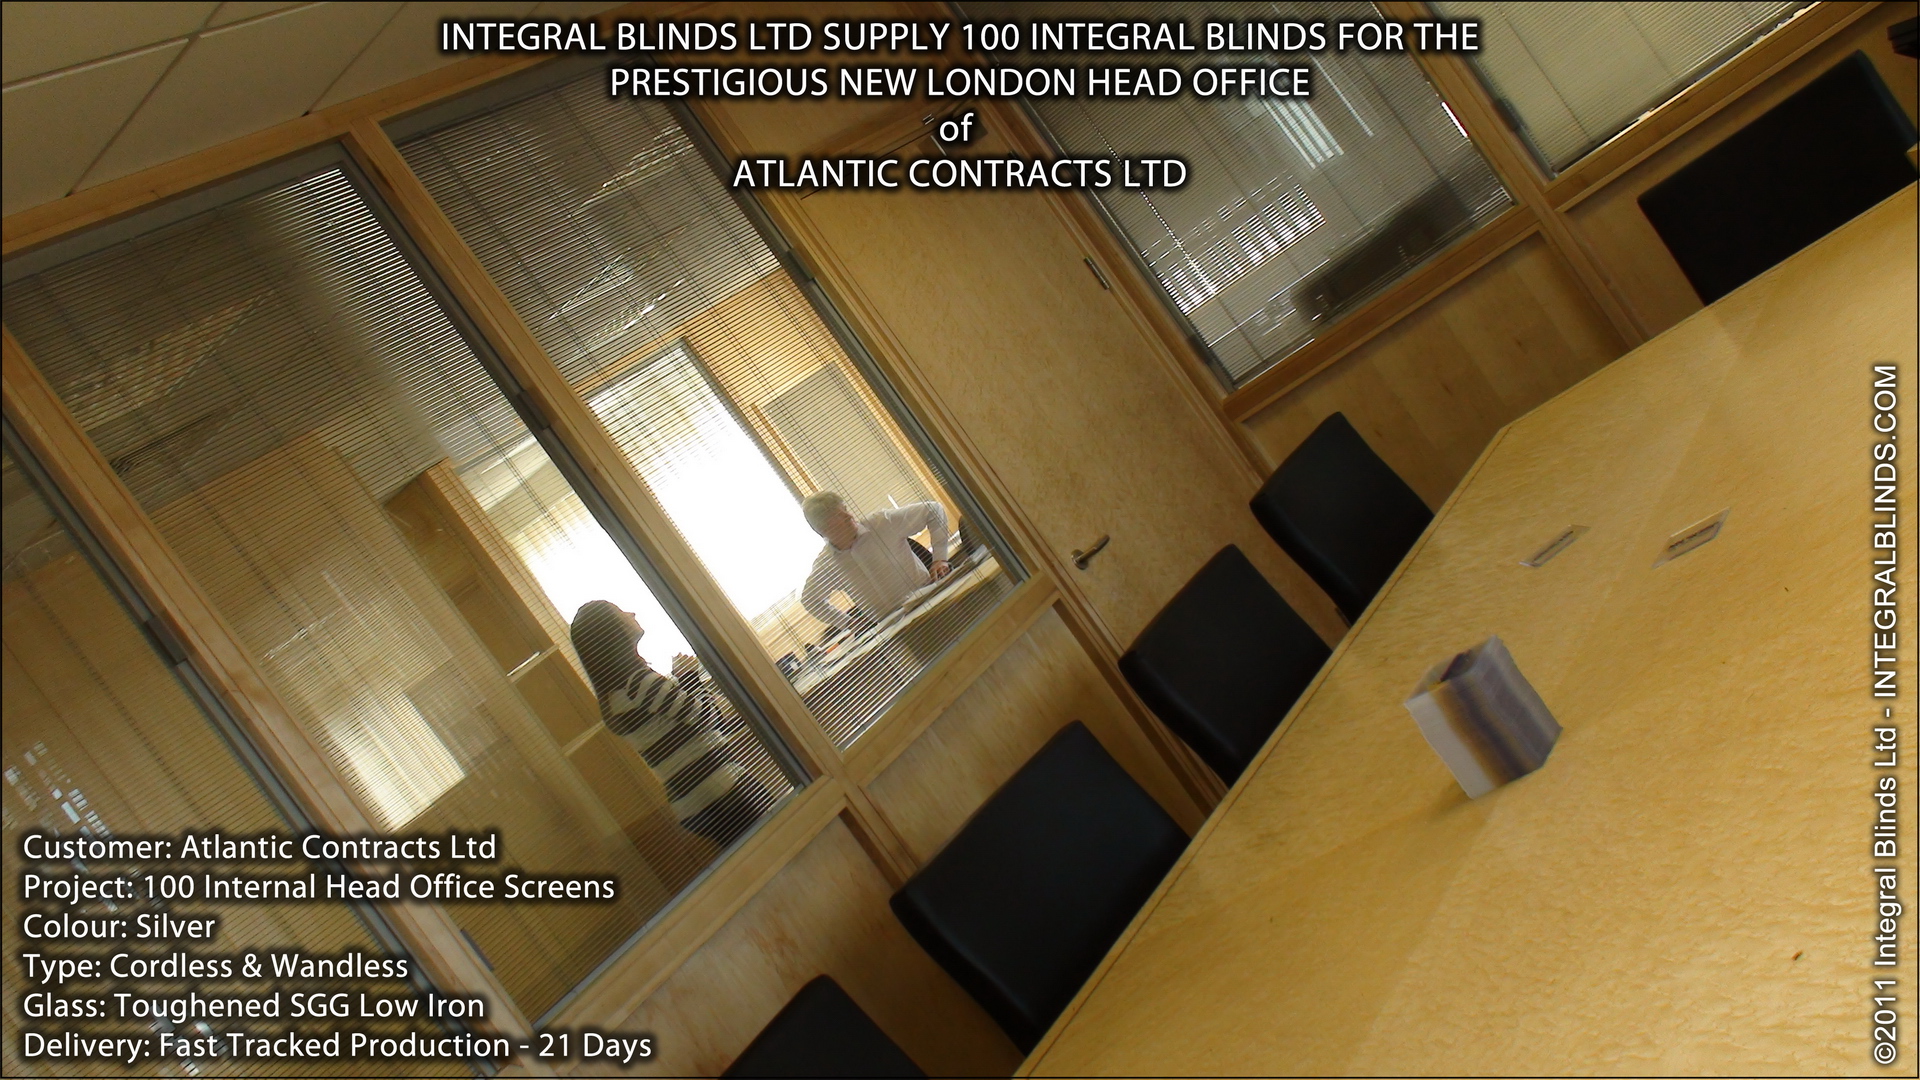 Atlantic Contracts chhose SwiftGlide Integral Blinds for their own office fit out